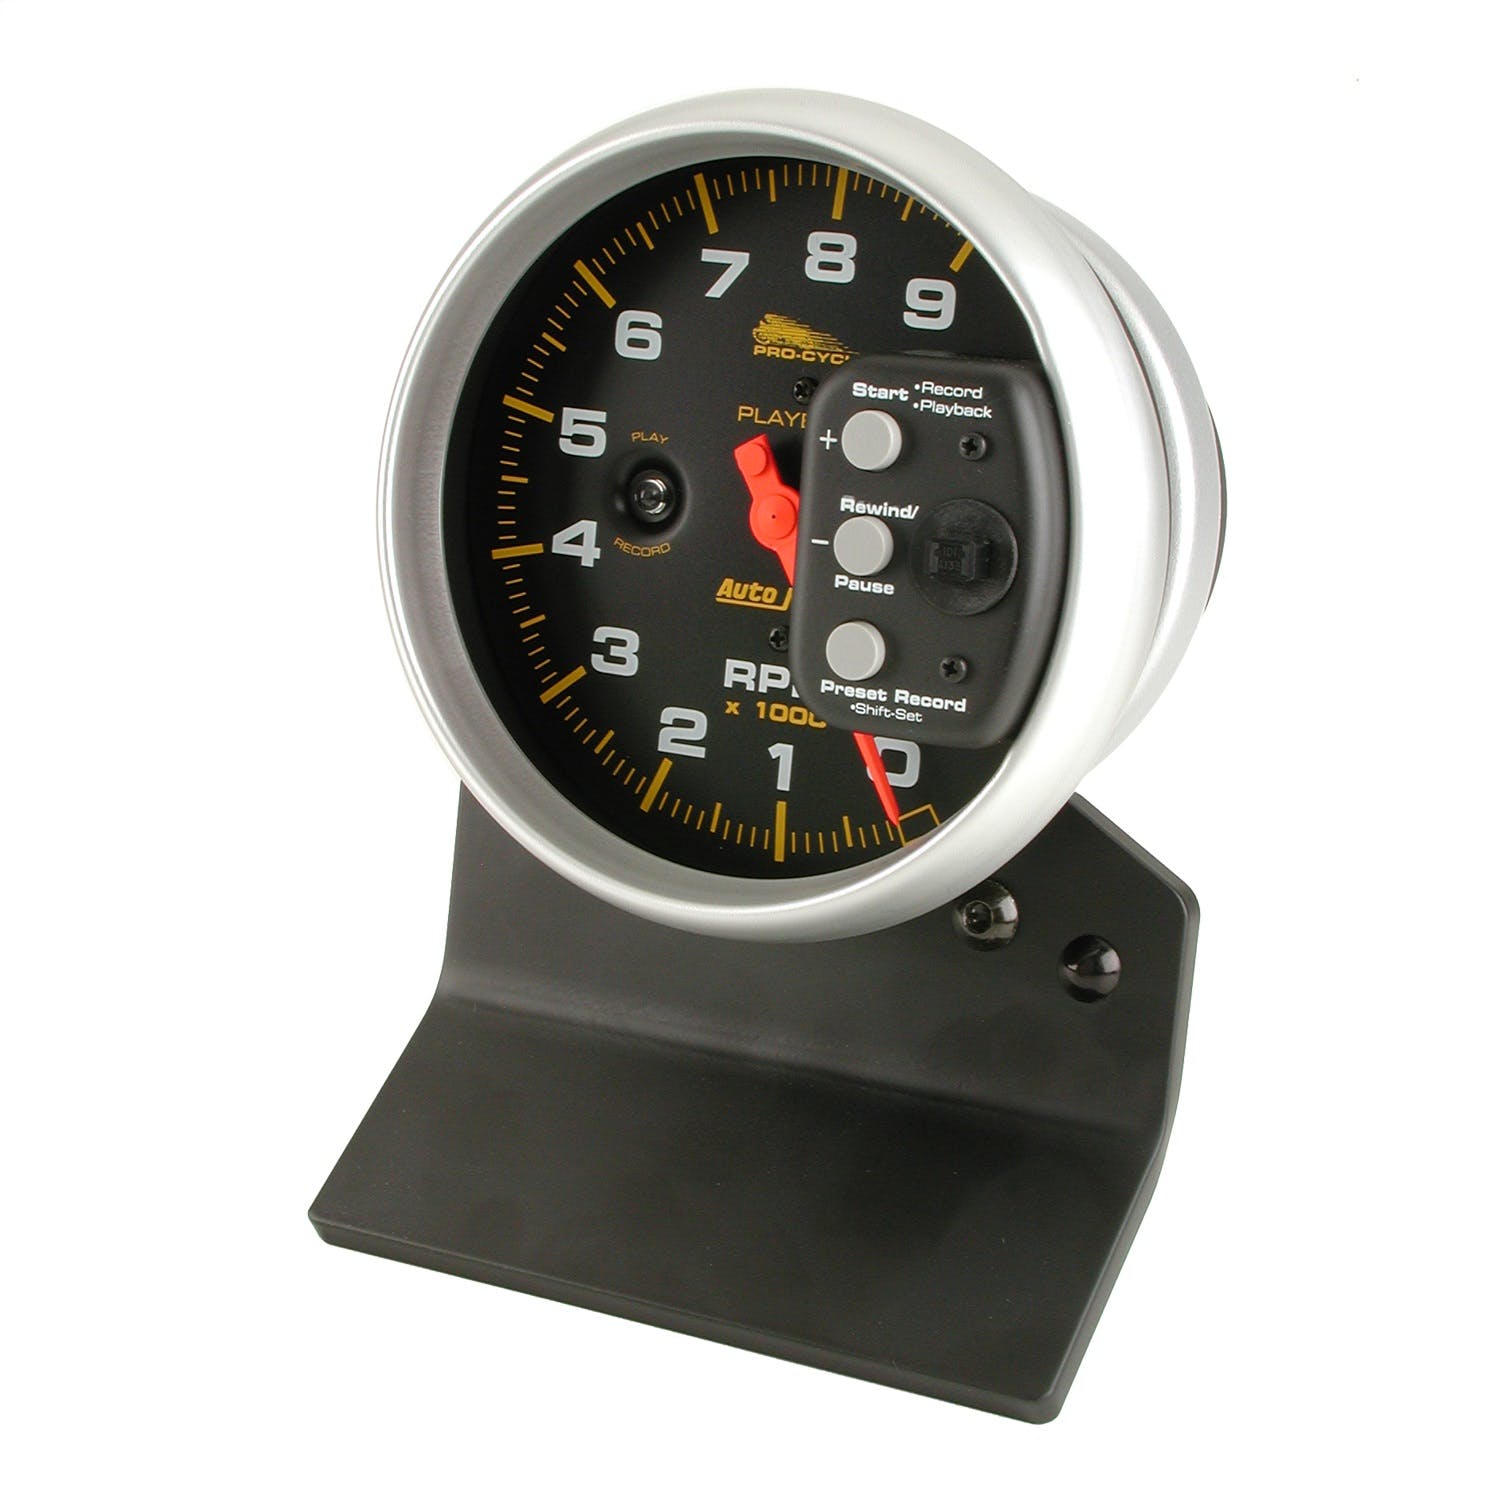 AutoMeter Products 19266 Tachometer Gauge, Black-Pro Cycle 5, 9K RPM, Pedestal with RPM Playback